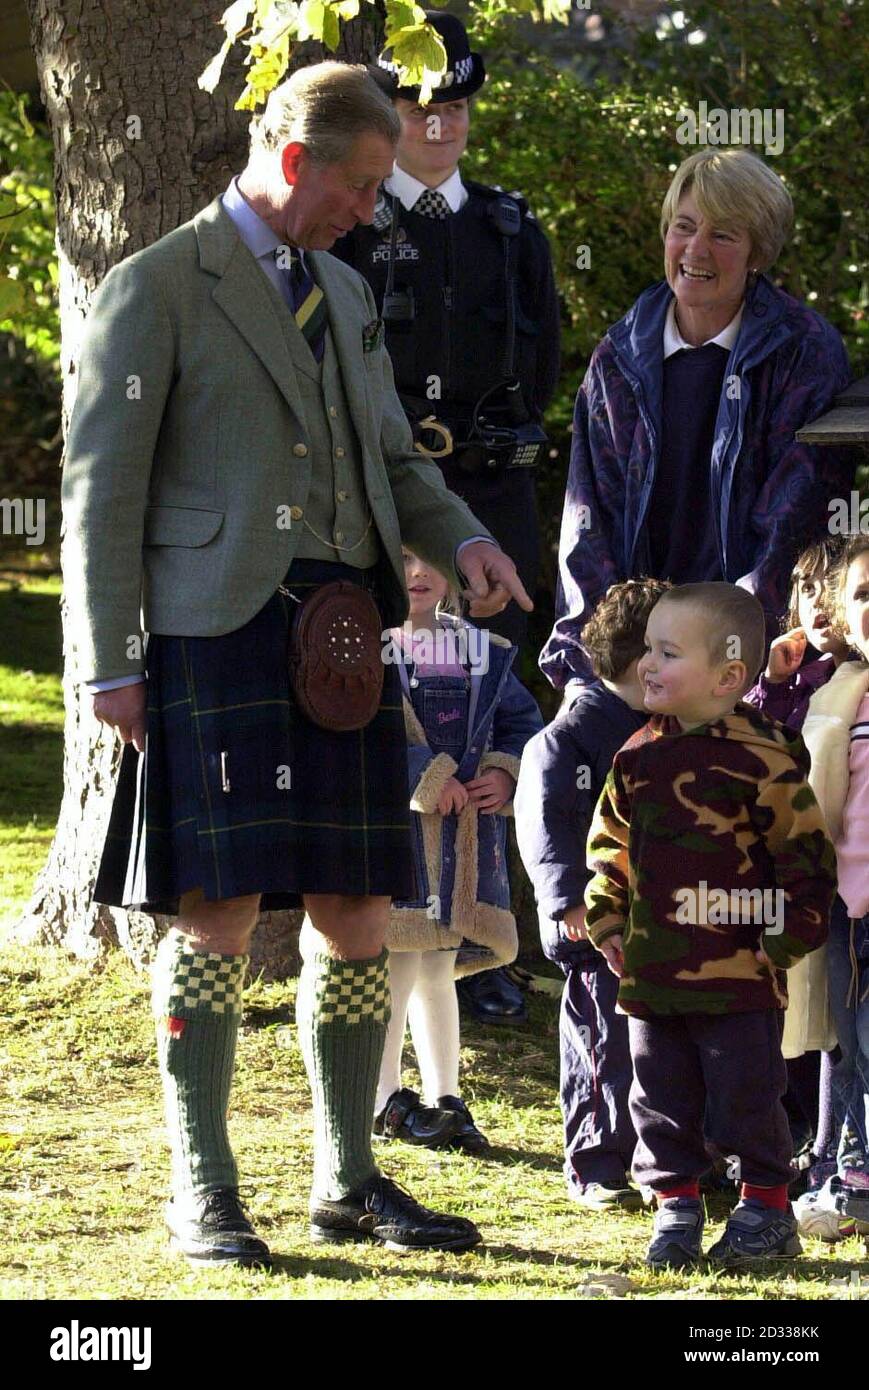 His Royal Highness the Prince Of Wales, Duke of Rothesay Deputy Colonel in Chief to the Highlanders (Royal Highland Regiment) at the Gordon Highlanders Museum in Aberdeen where he views a parade during a ceremony to lay up the Regiment's last Colours. He is pictured meeting children from the TreeHouse Nursery who were there to meet him on his departure. Stock Photo